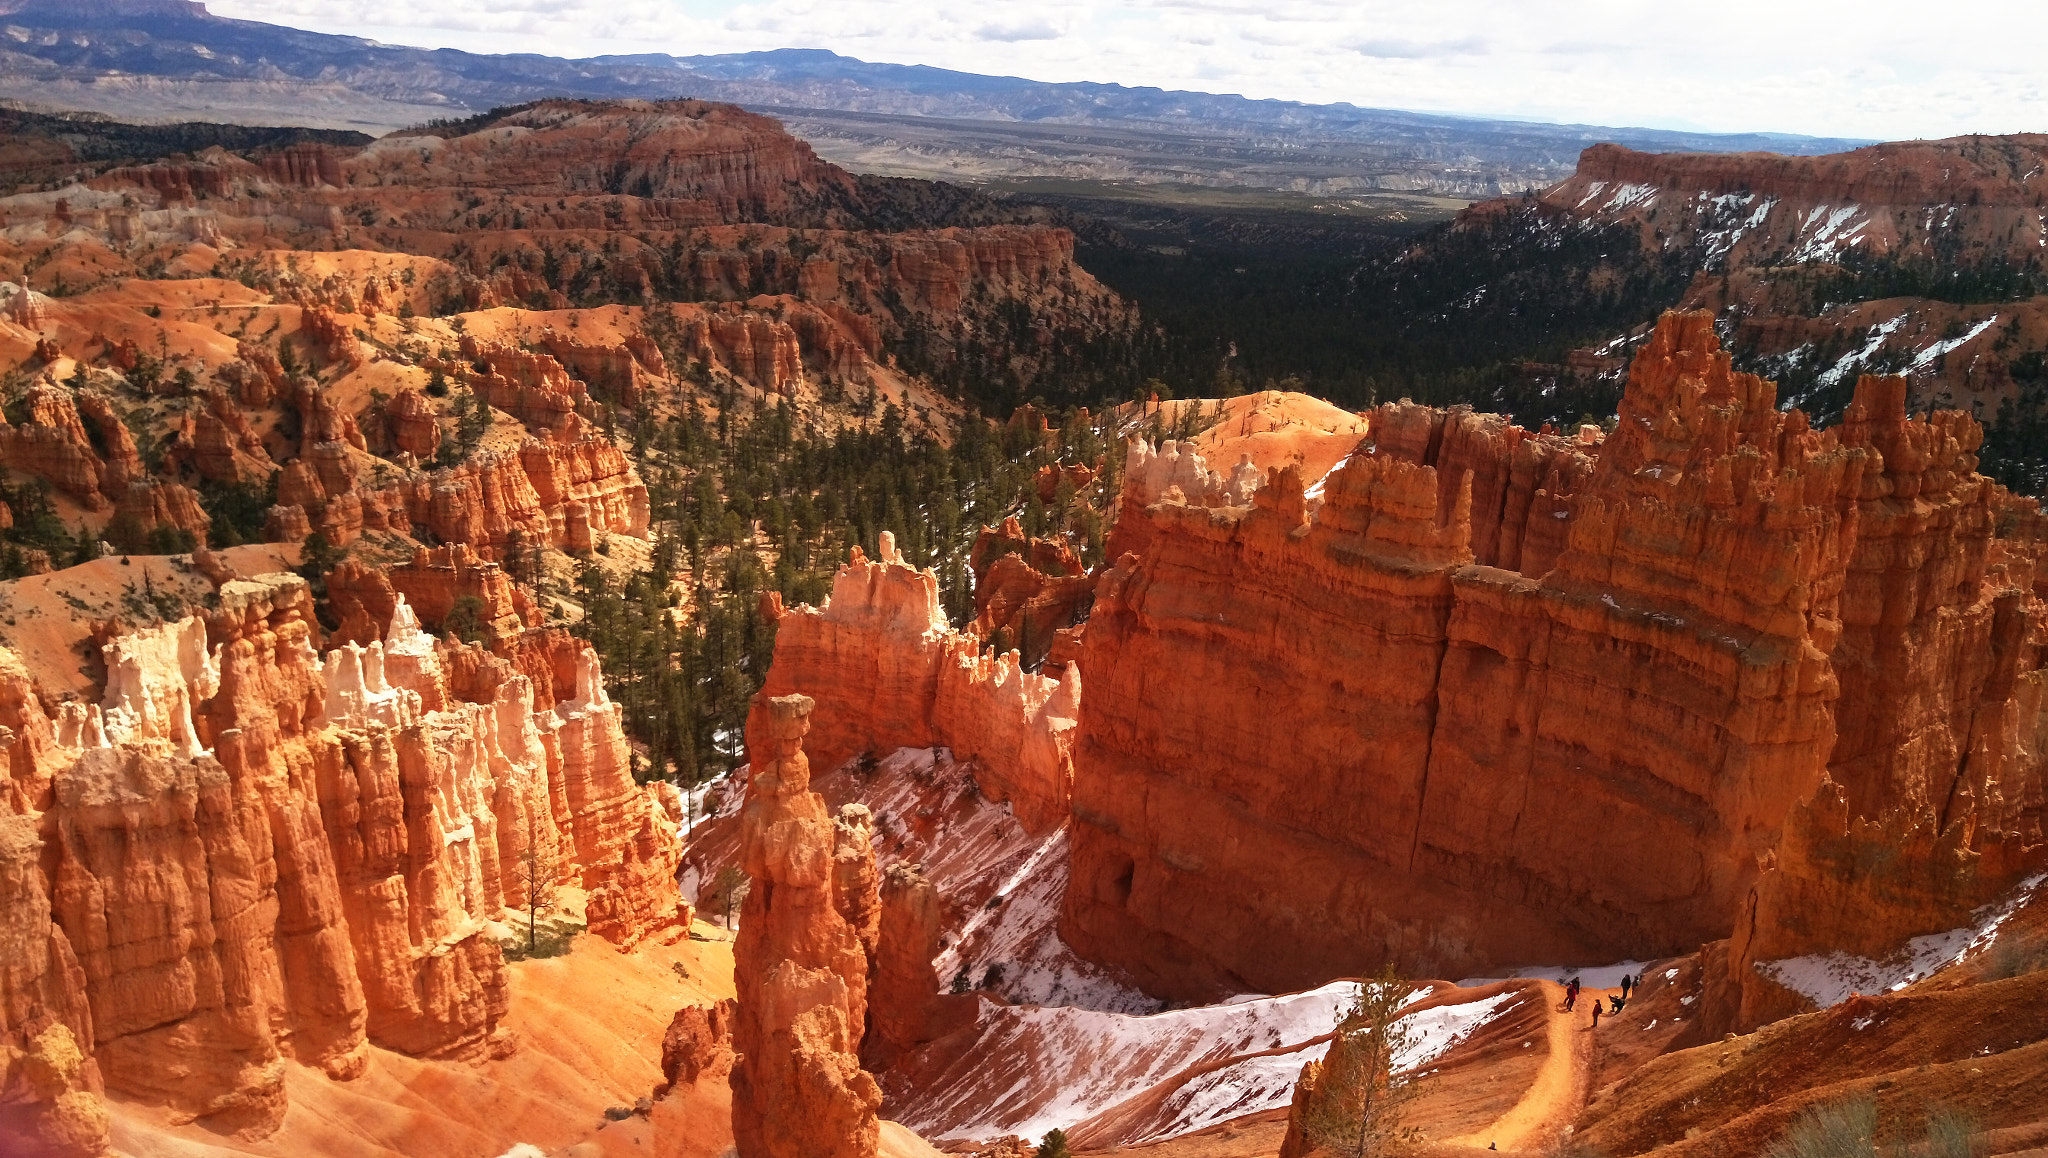 HTC ONE M9+ sample photo. Bryce canyon photography